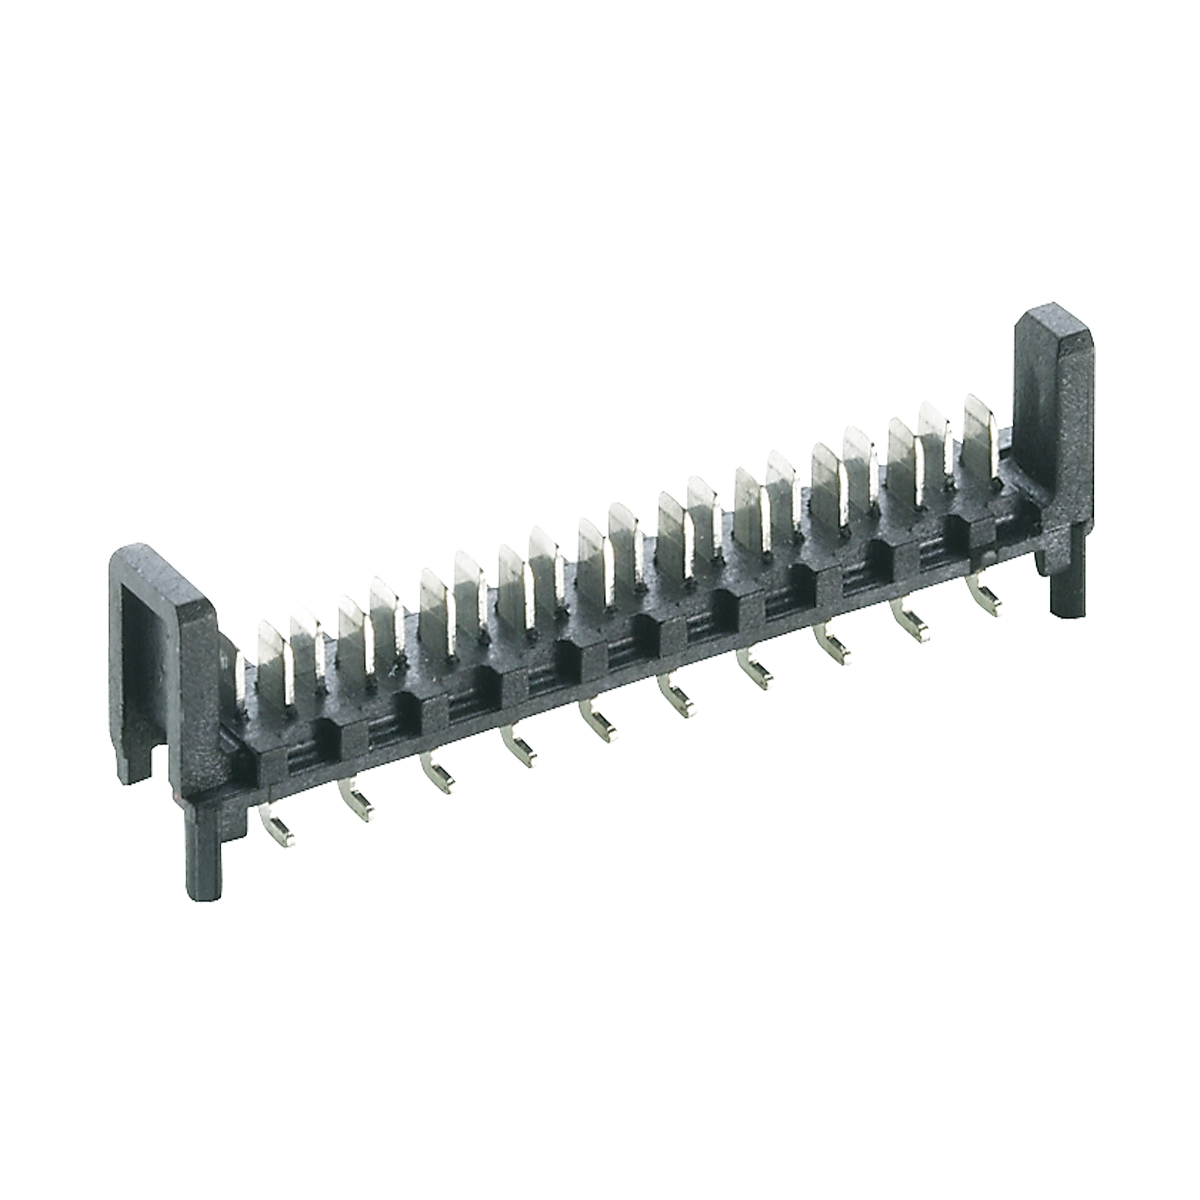 Lumberg: MICS/SMD (Series 30 | Micromodul™ connectors, pitch 1.27 mm)